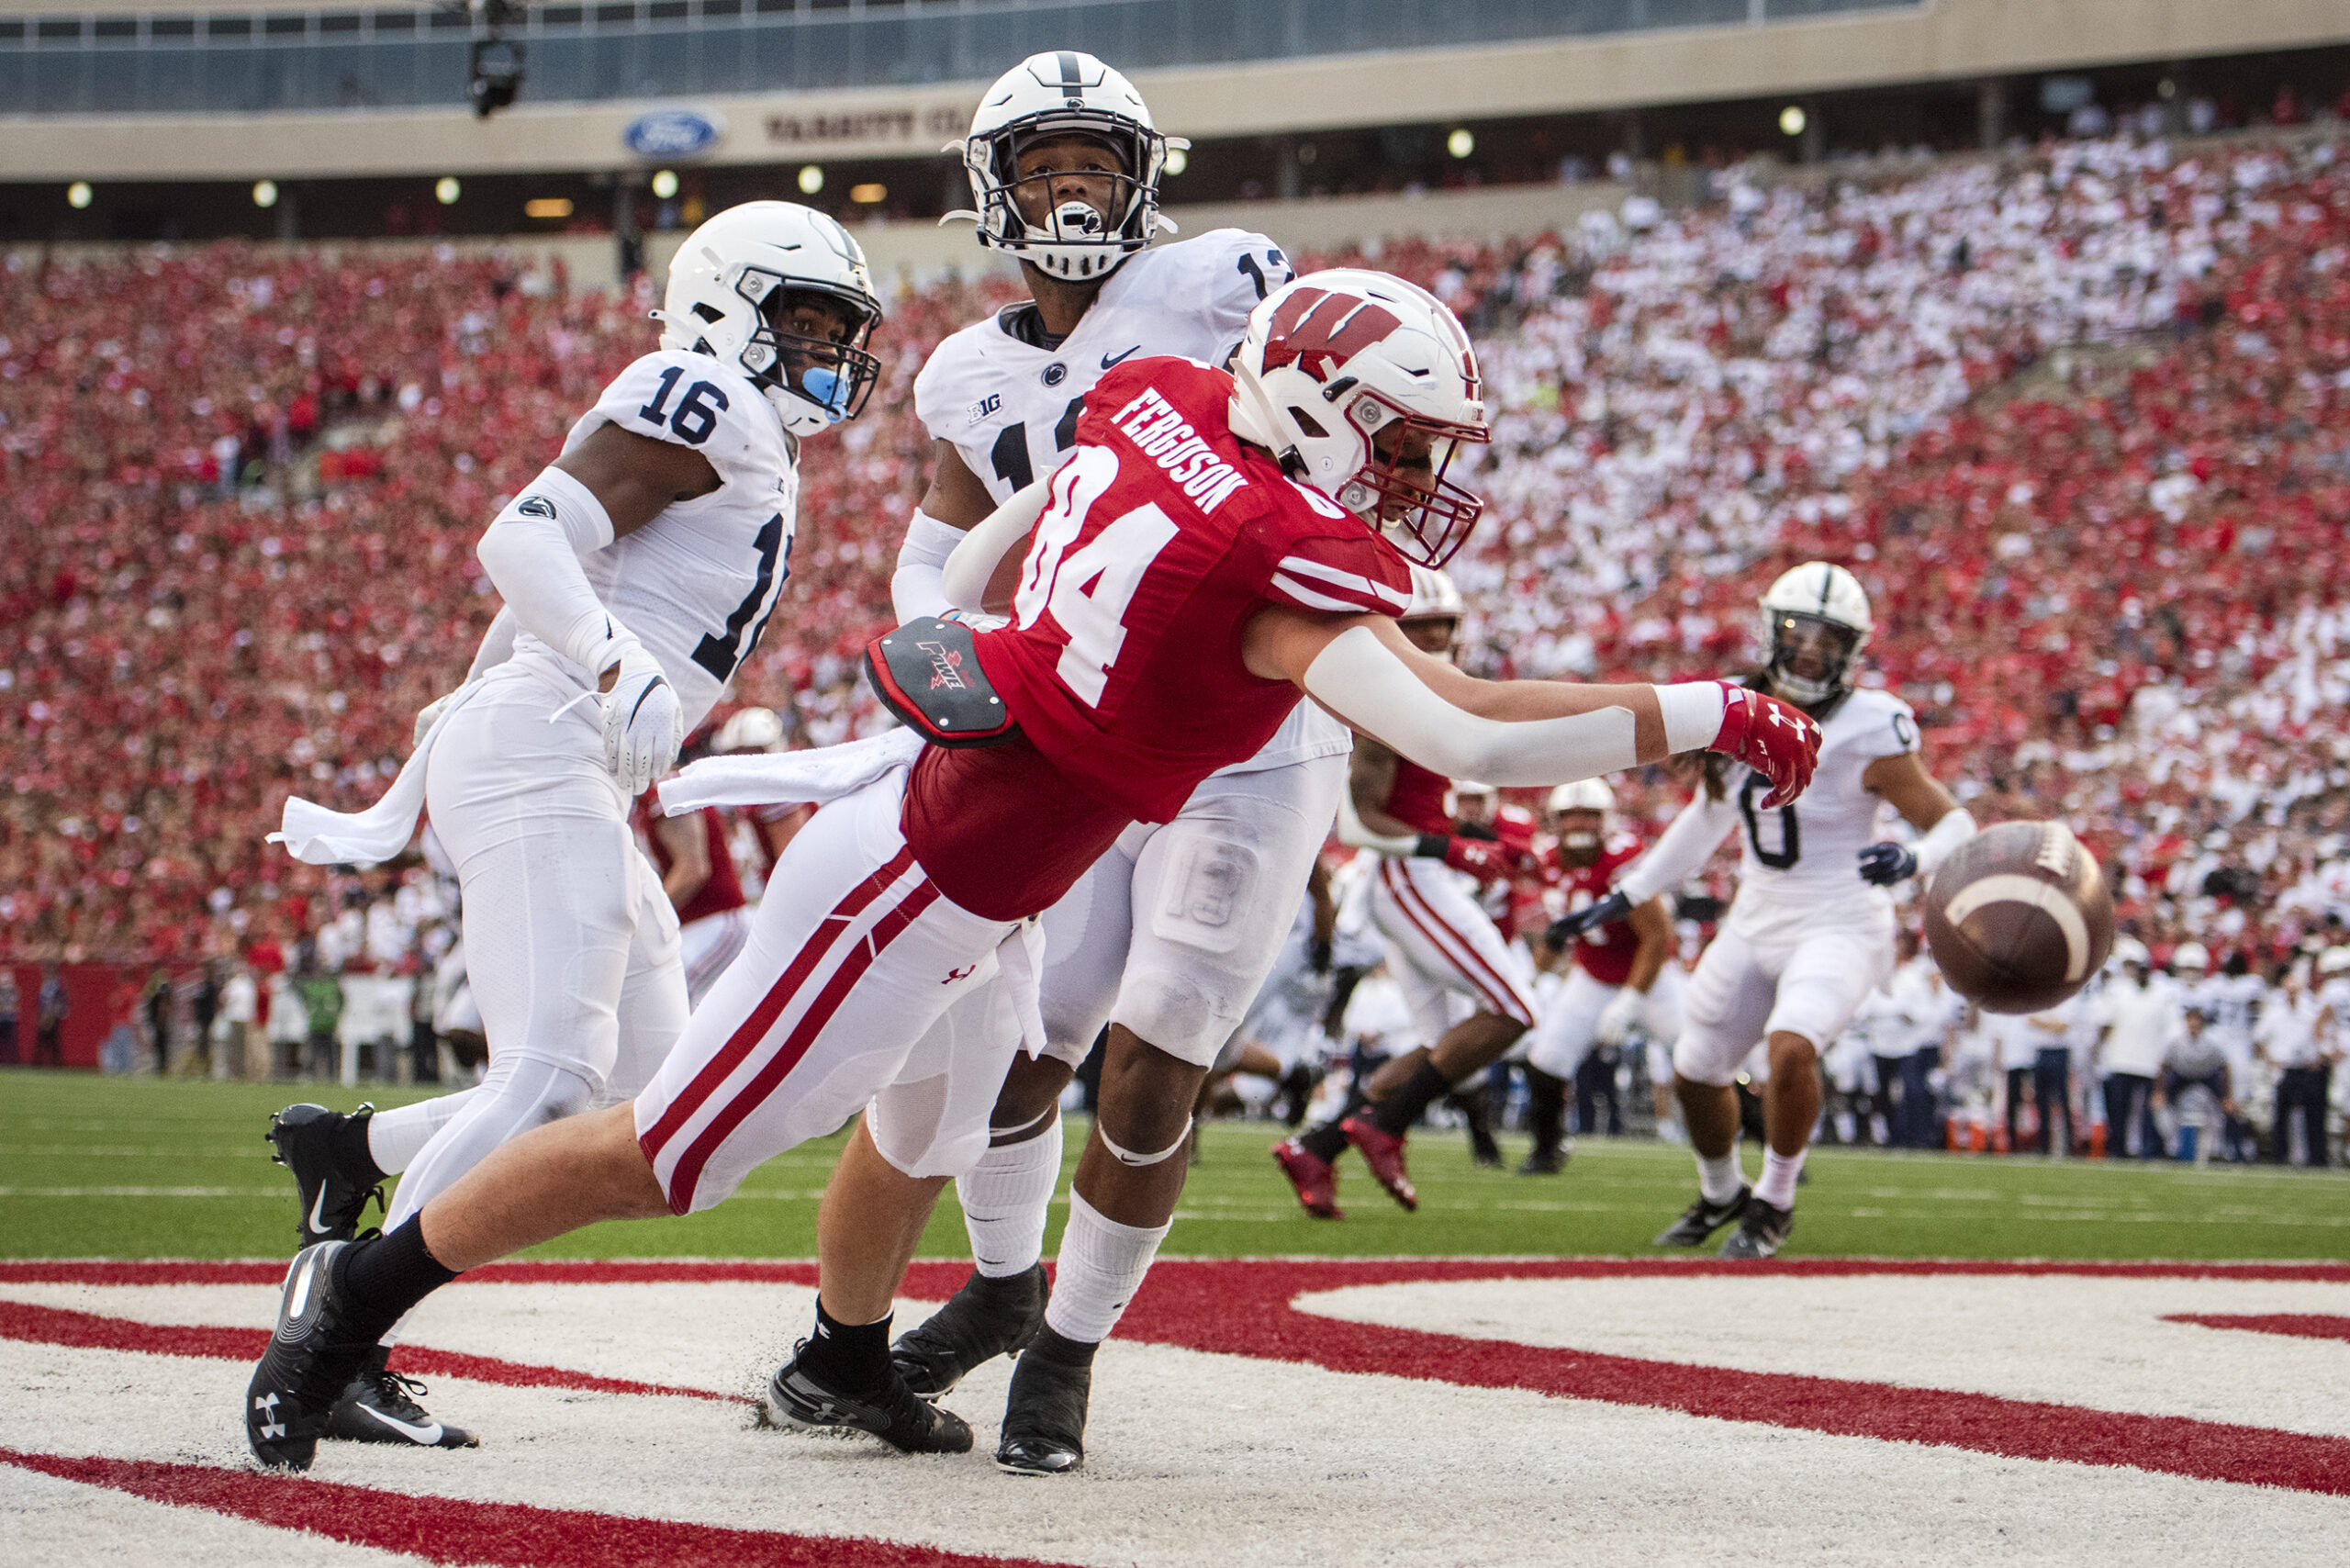 A Wisconsin player falls as he reaches for the ball. He's pushed by two Penn State defenders.